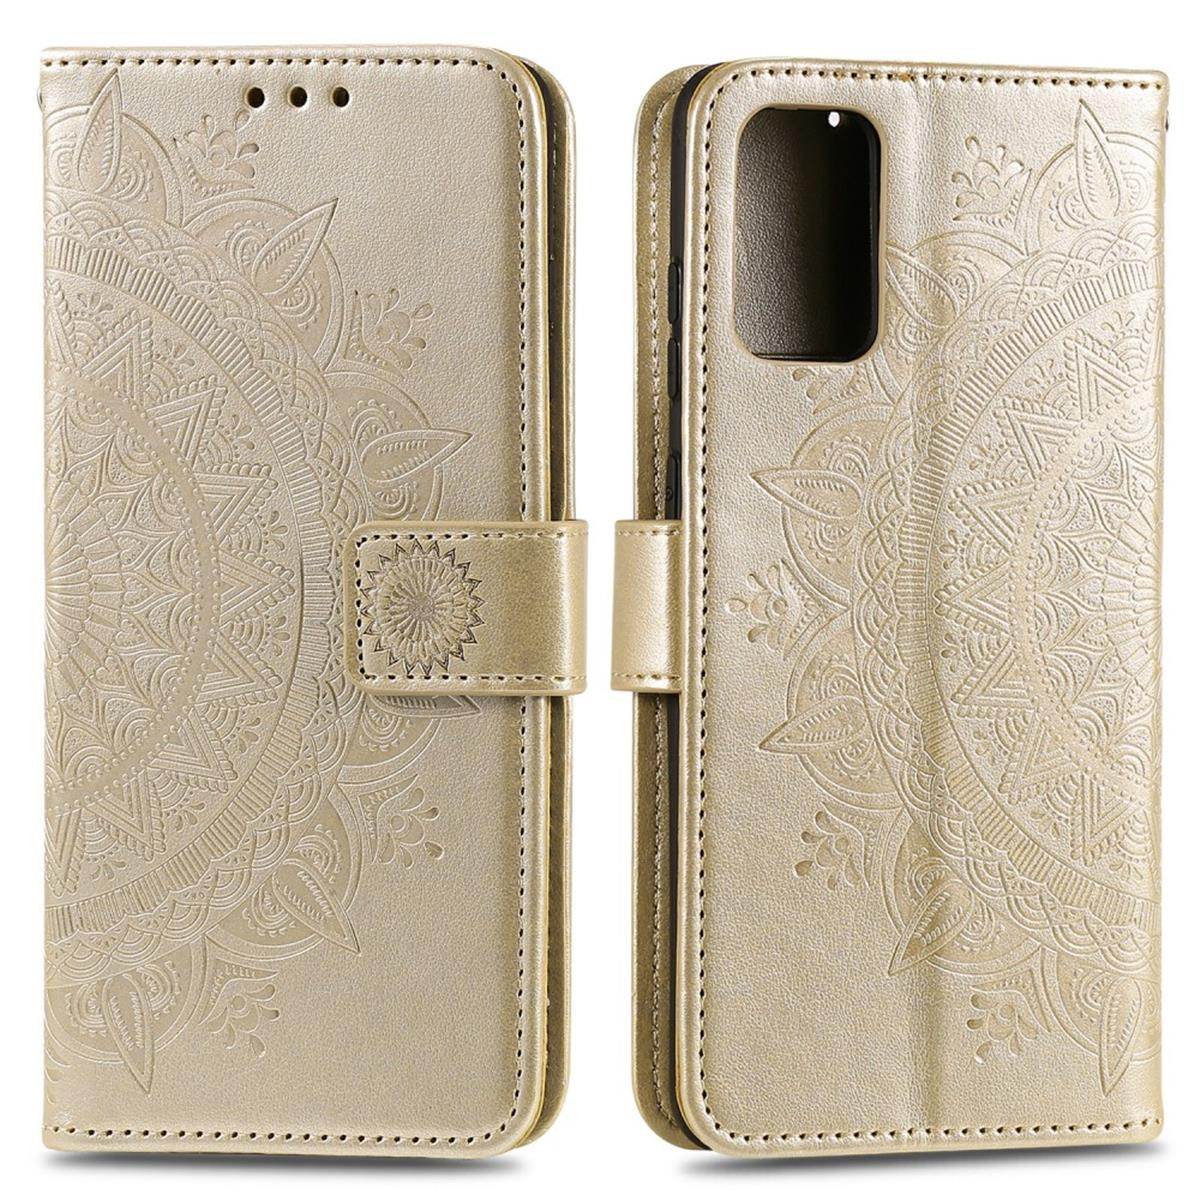 Gold Muster, Klapphülle Bookcover, M31s, mit COVERKINGZ Mandala Samsung, Galaxy